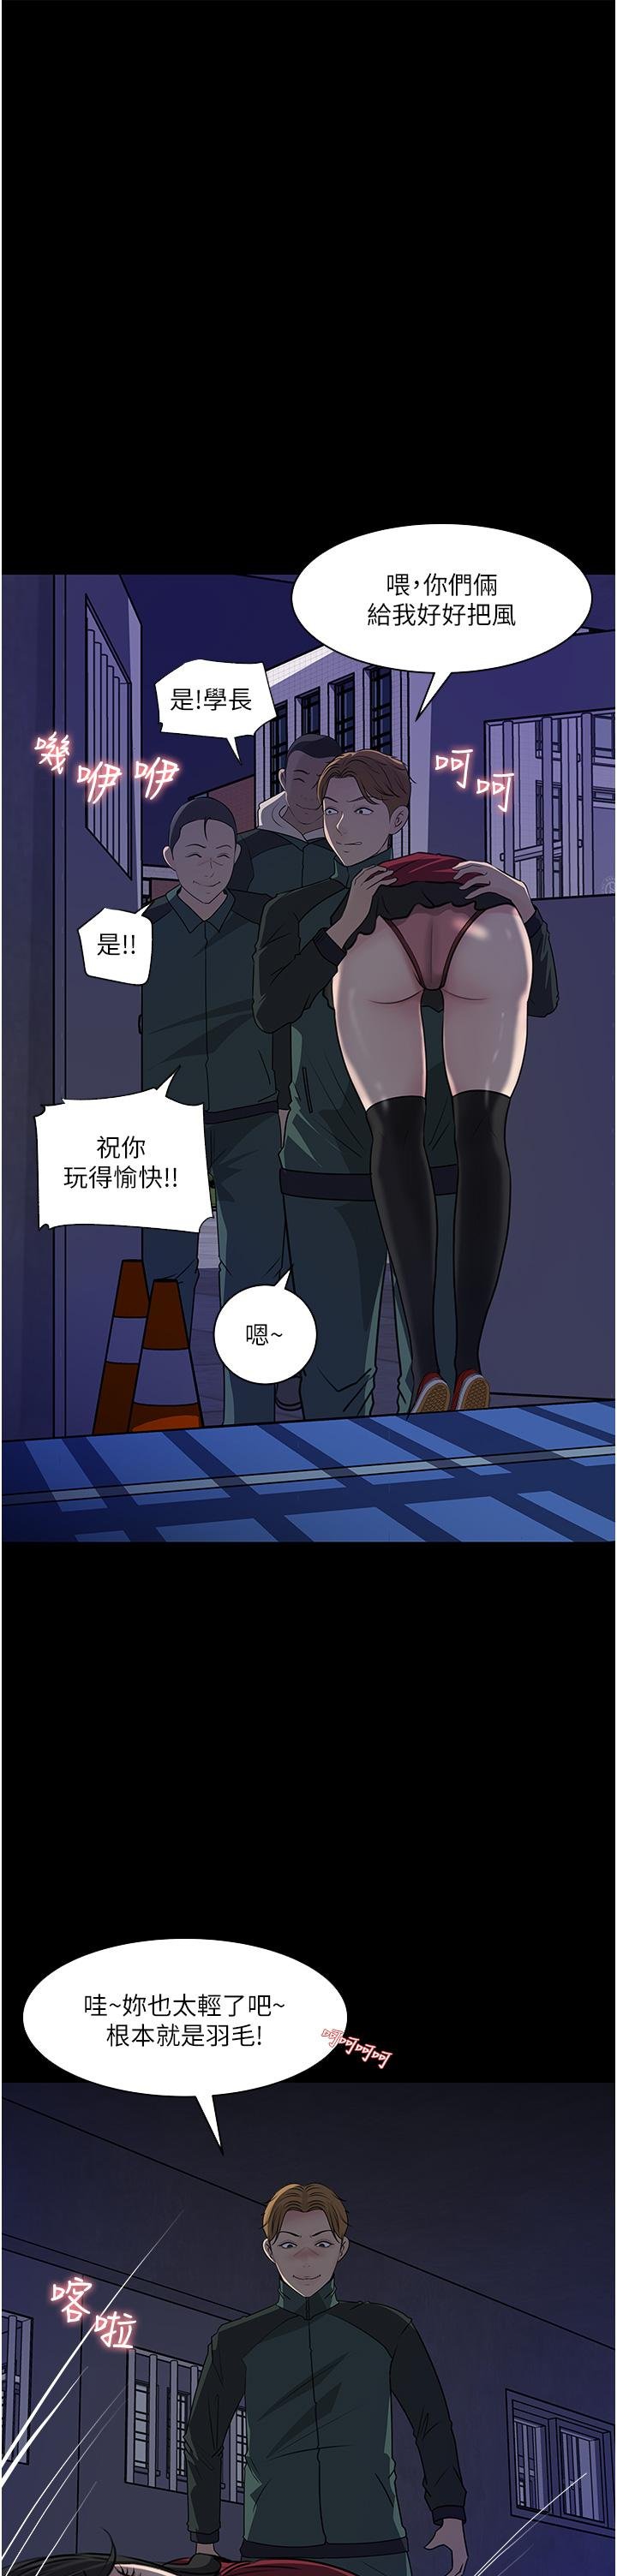 in-my-sister-in-law-raw-chap-39-38